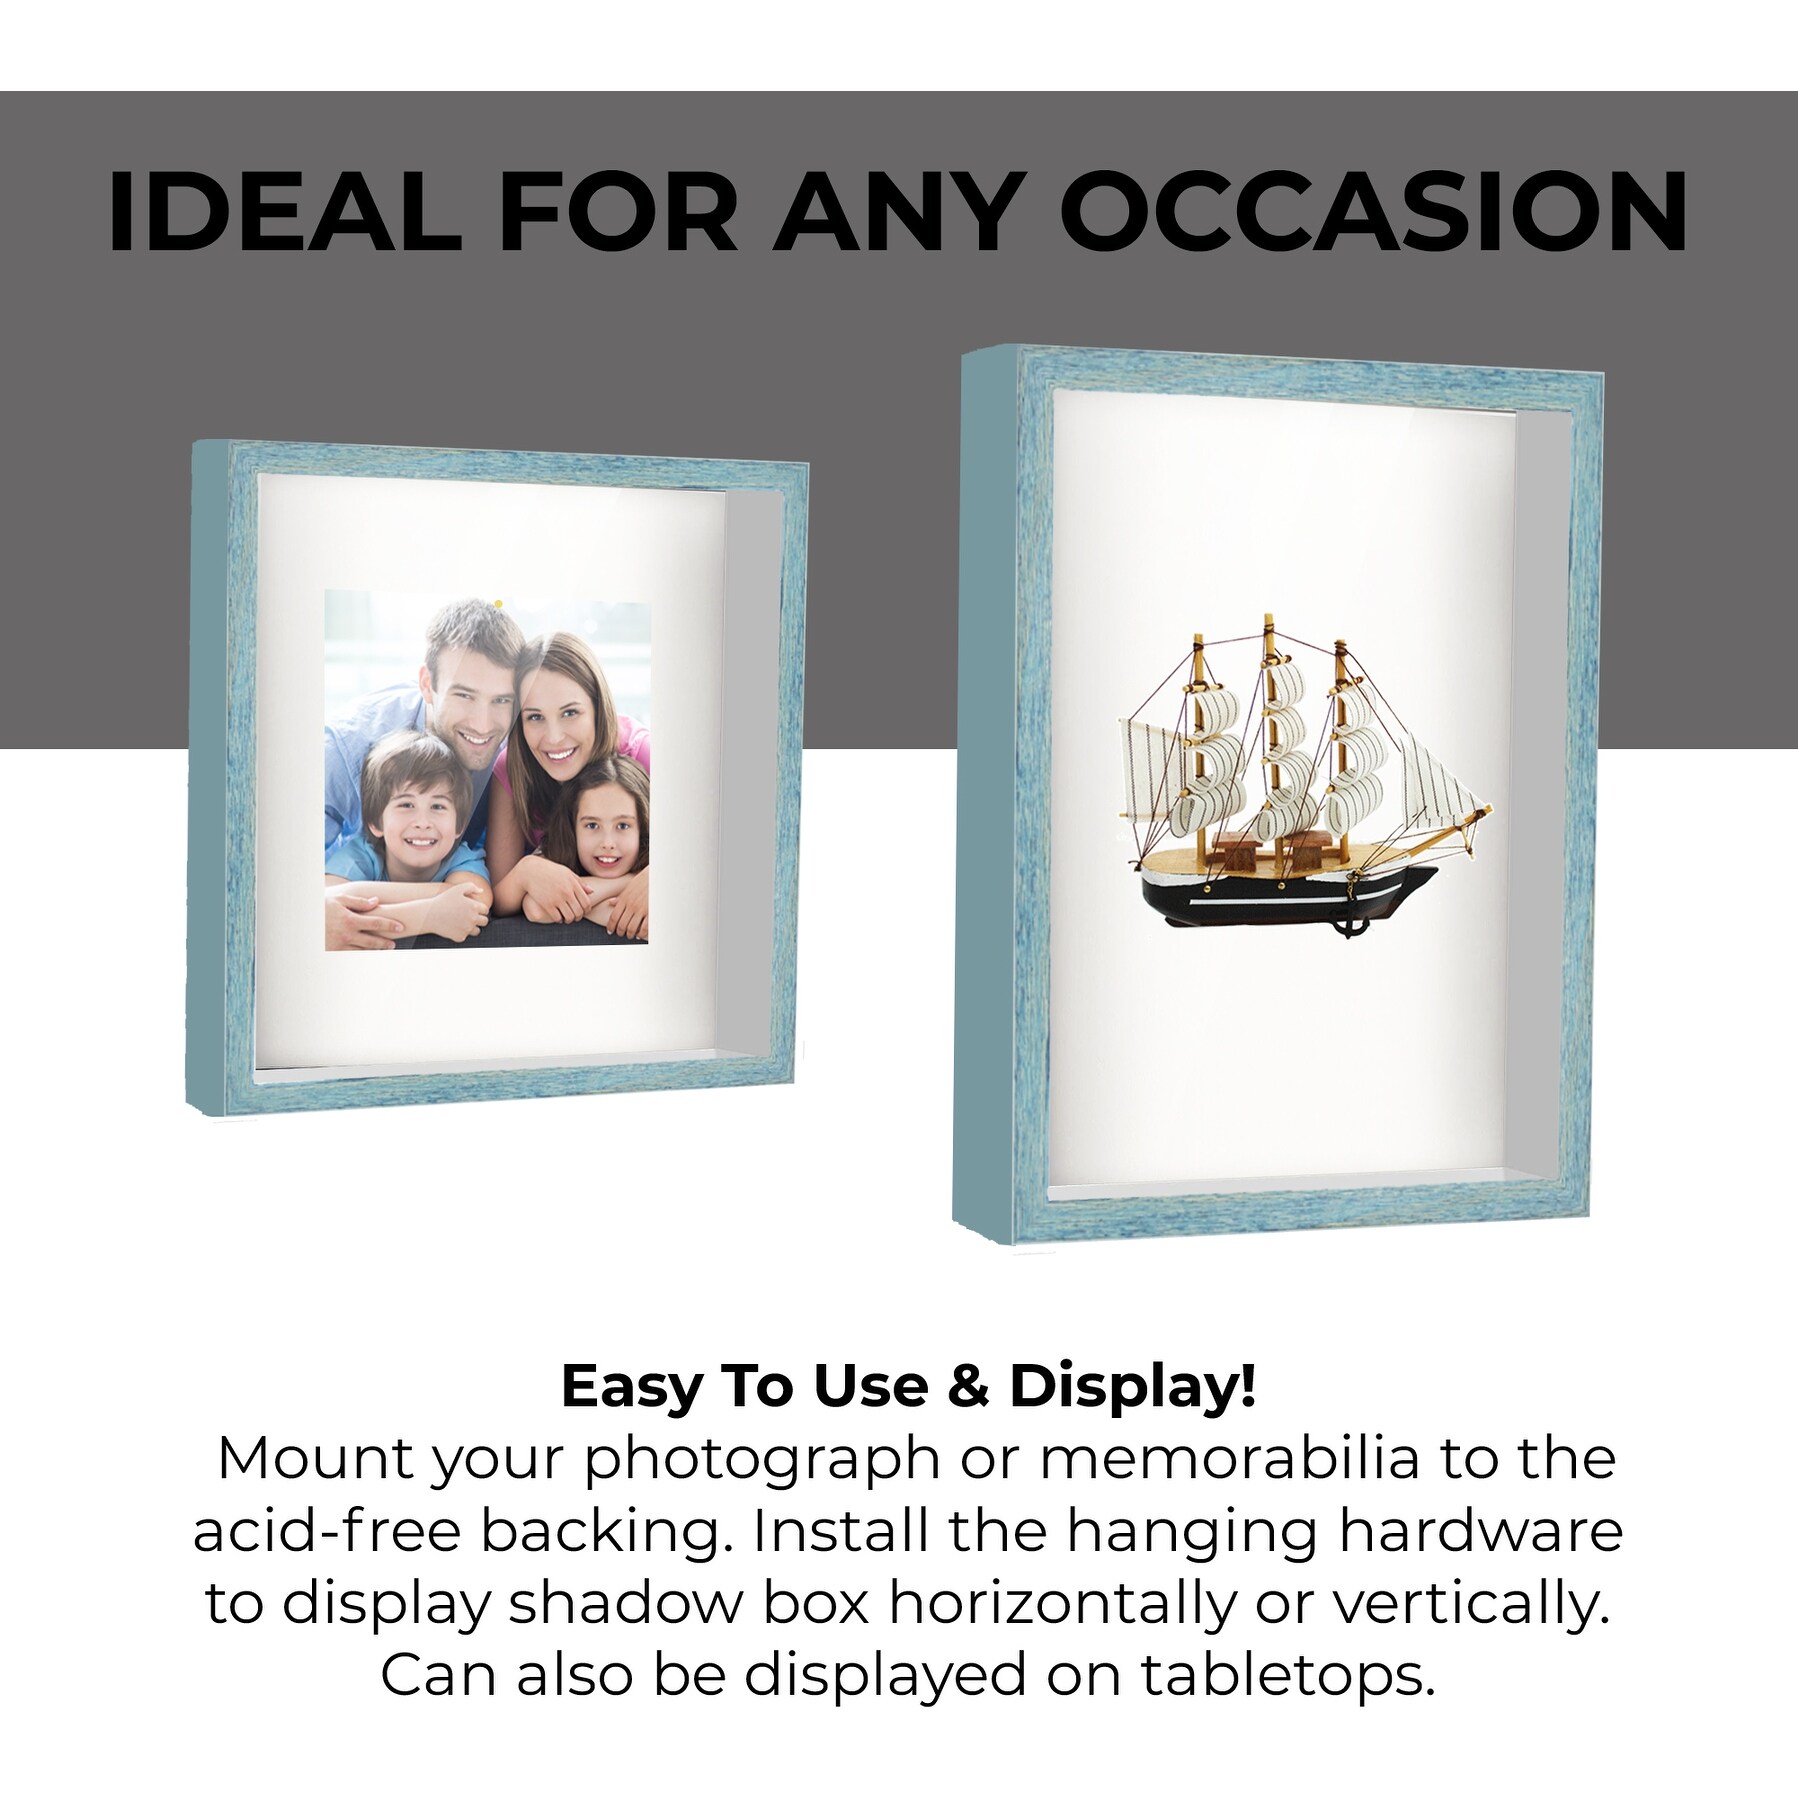 CustomPictureFrames 32x11 Modern Black Wood Picture Frame - with Acrylic Front and Foam Board Backing